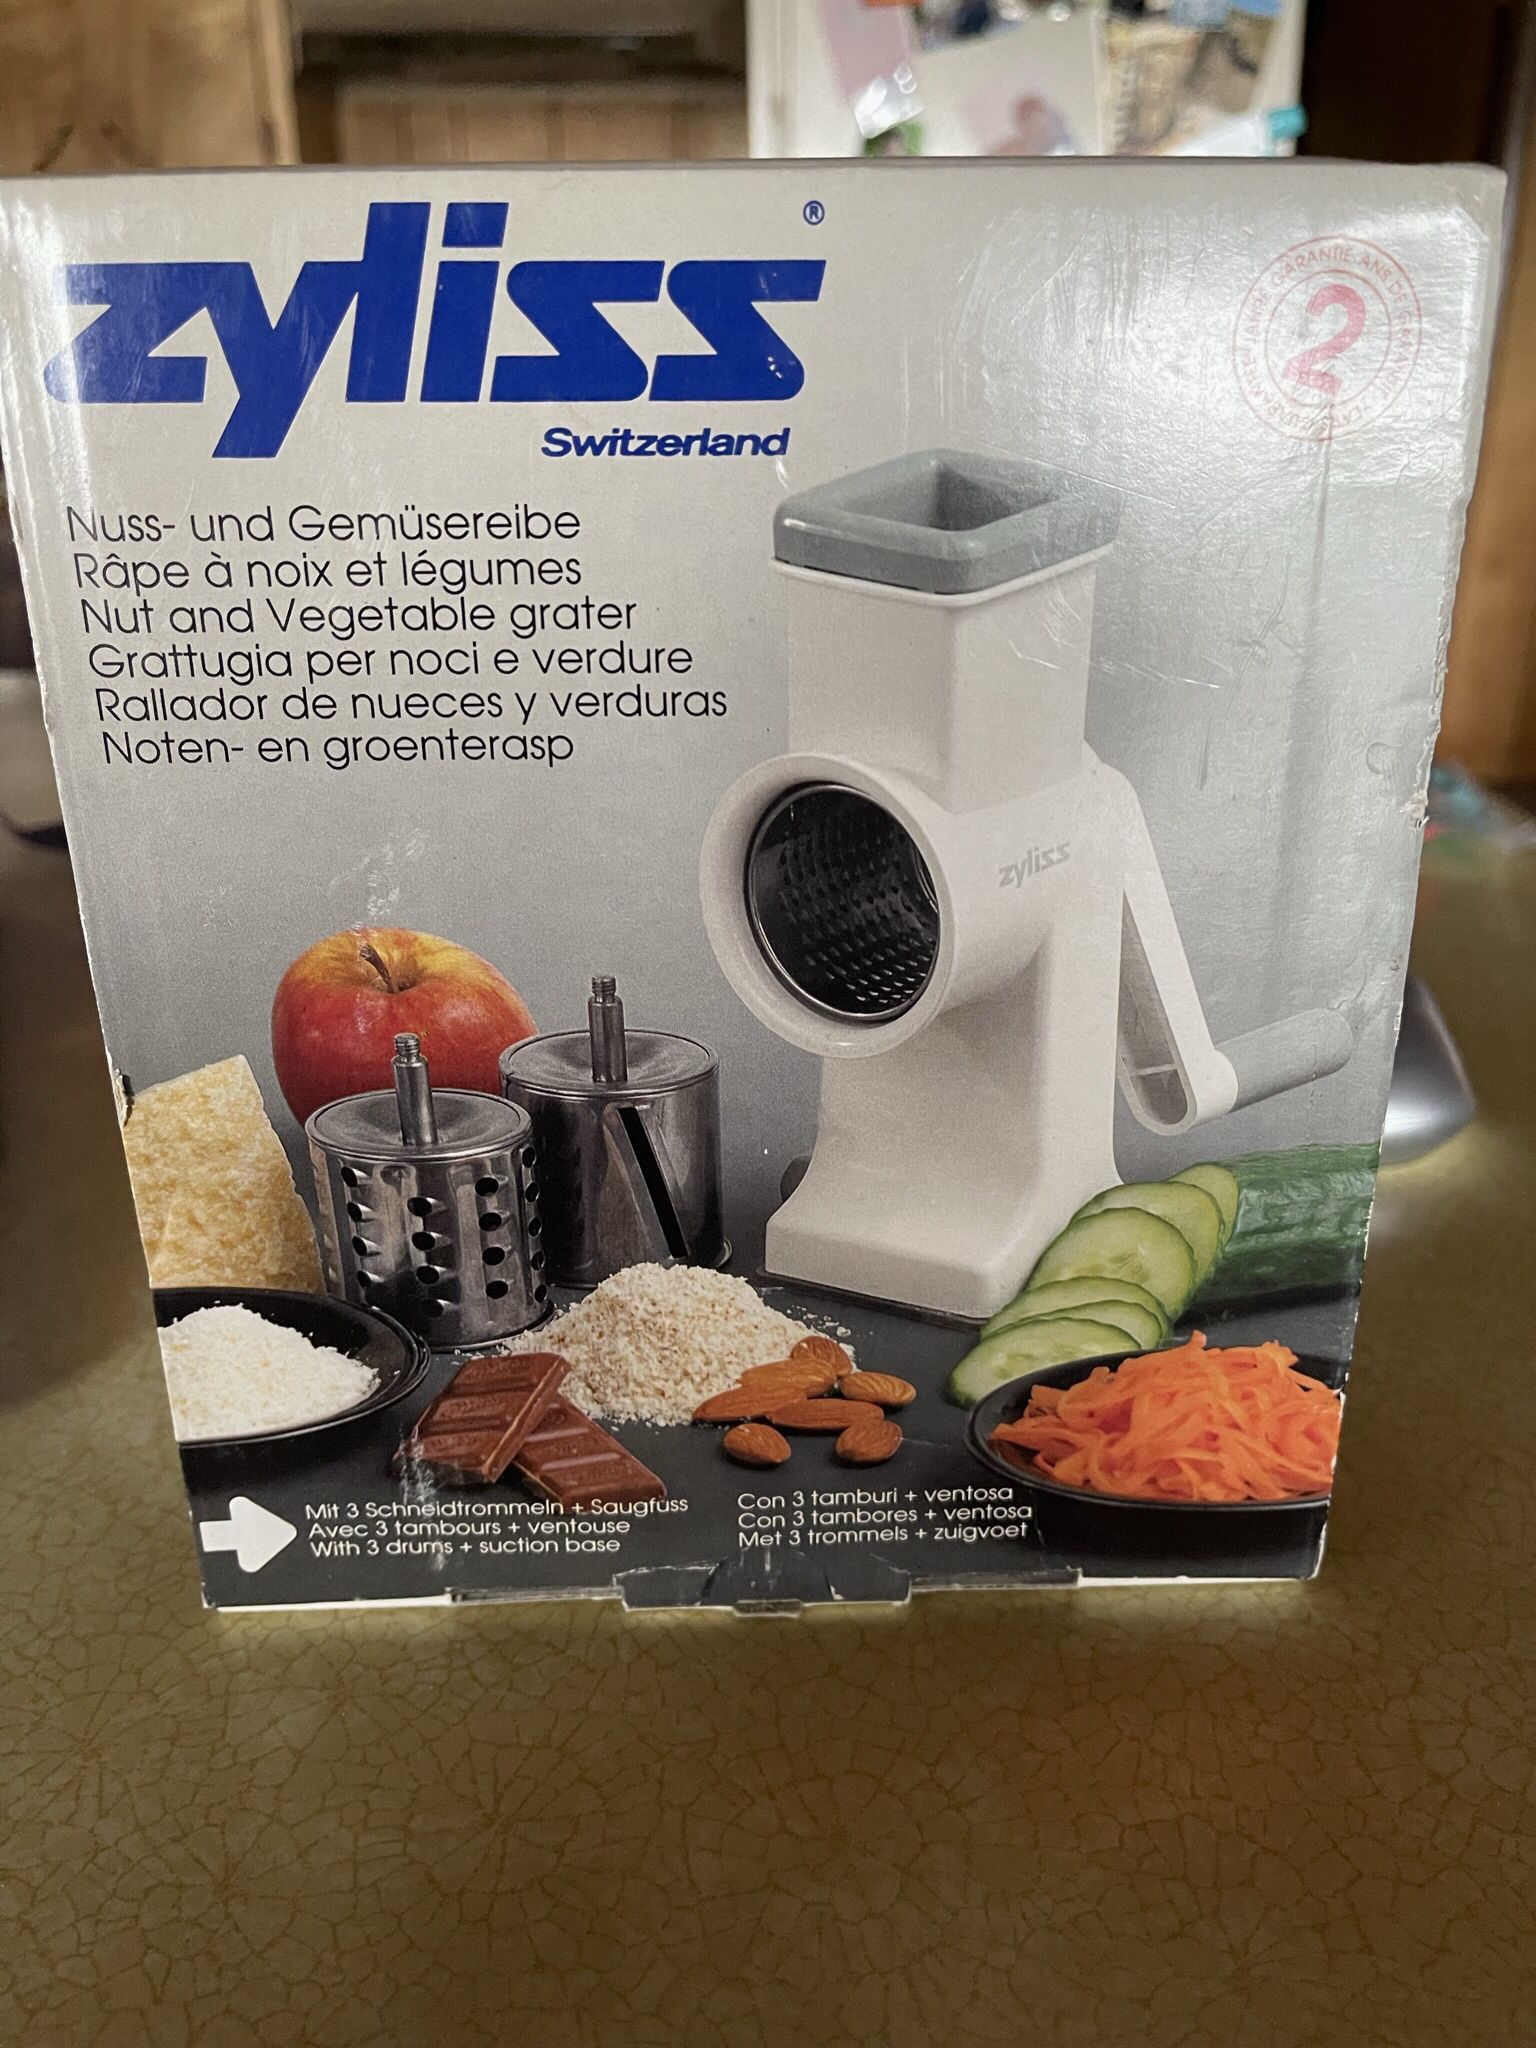 Zyliss E900027U 4 in 1 Slicer and Grater - Win Depot